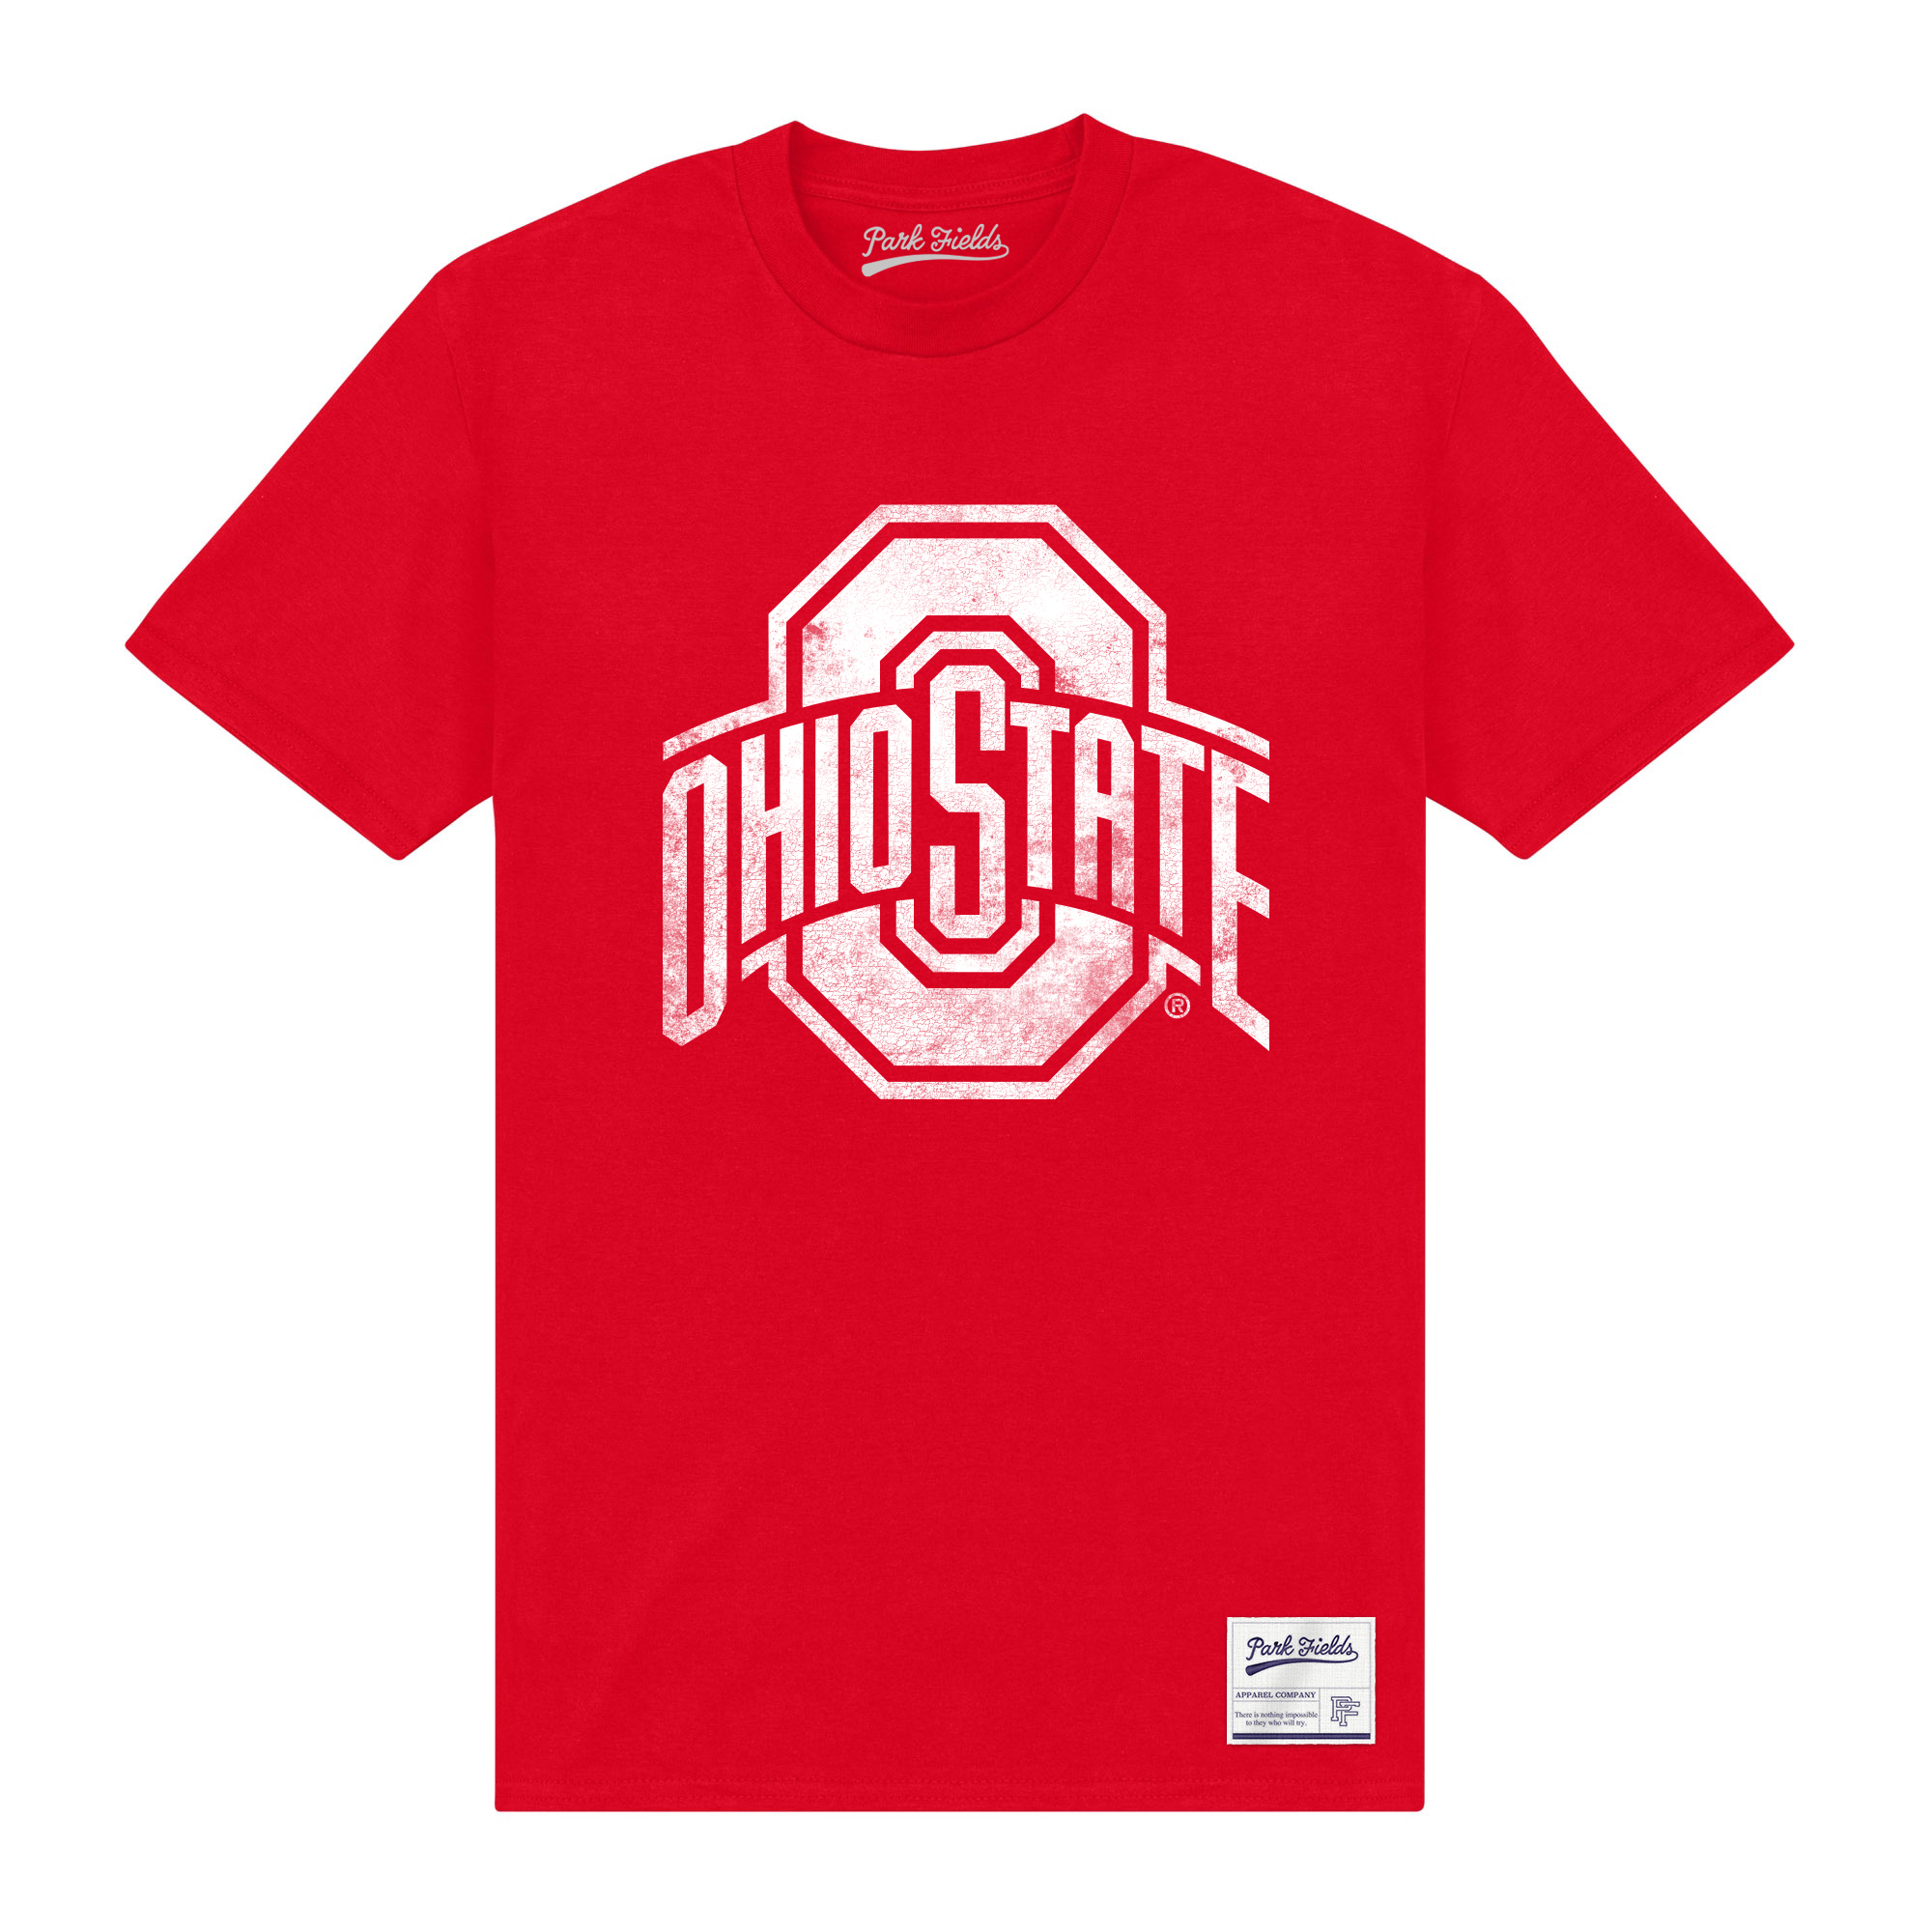 Official Ohio State University T-Shirt Red Short Sleeve Crew Neck T Shirt Tee